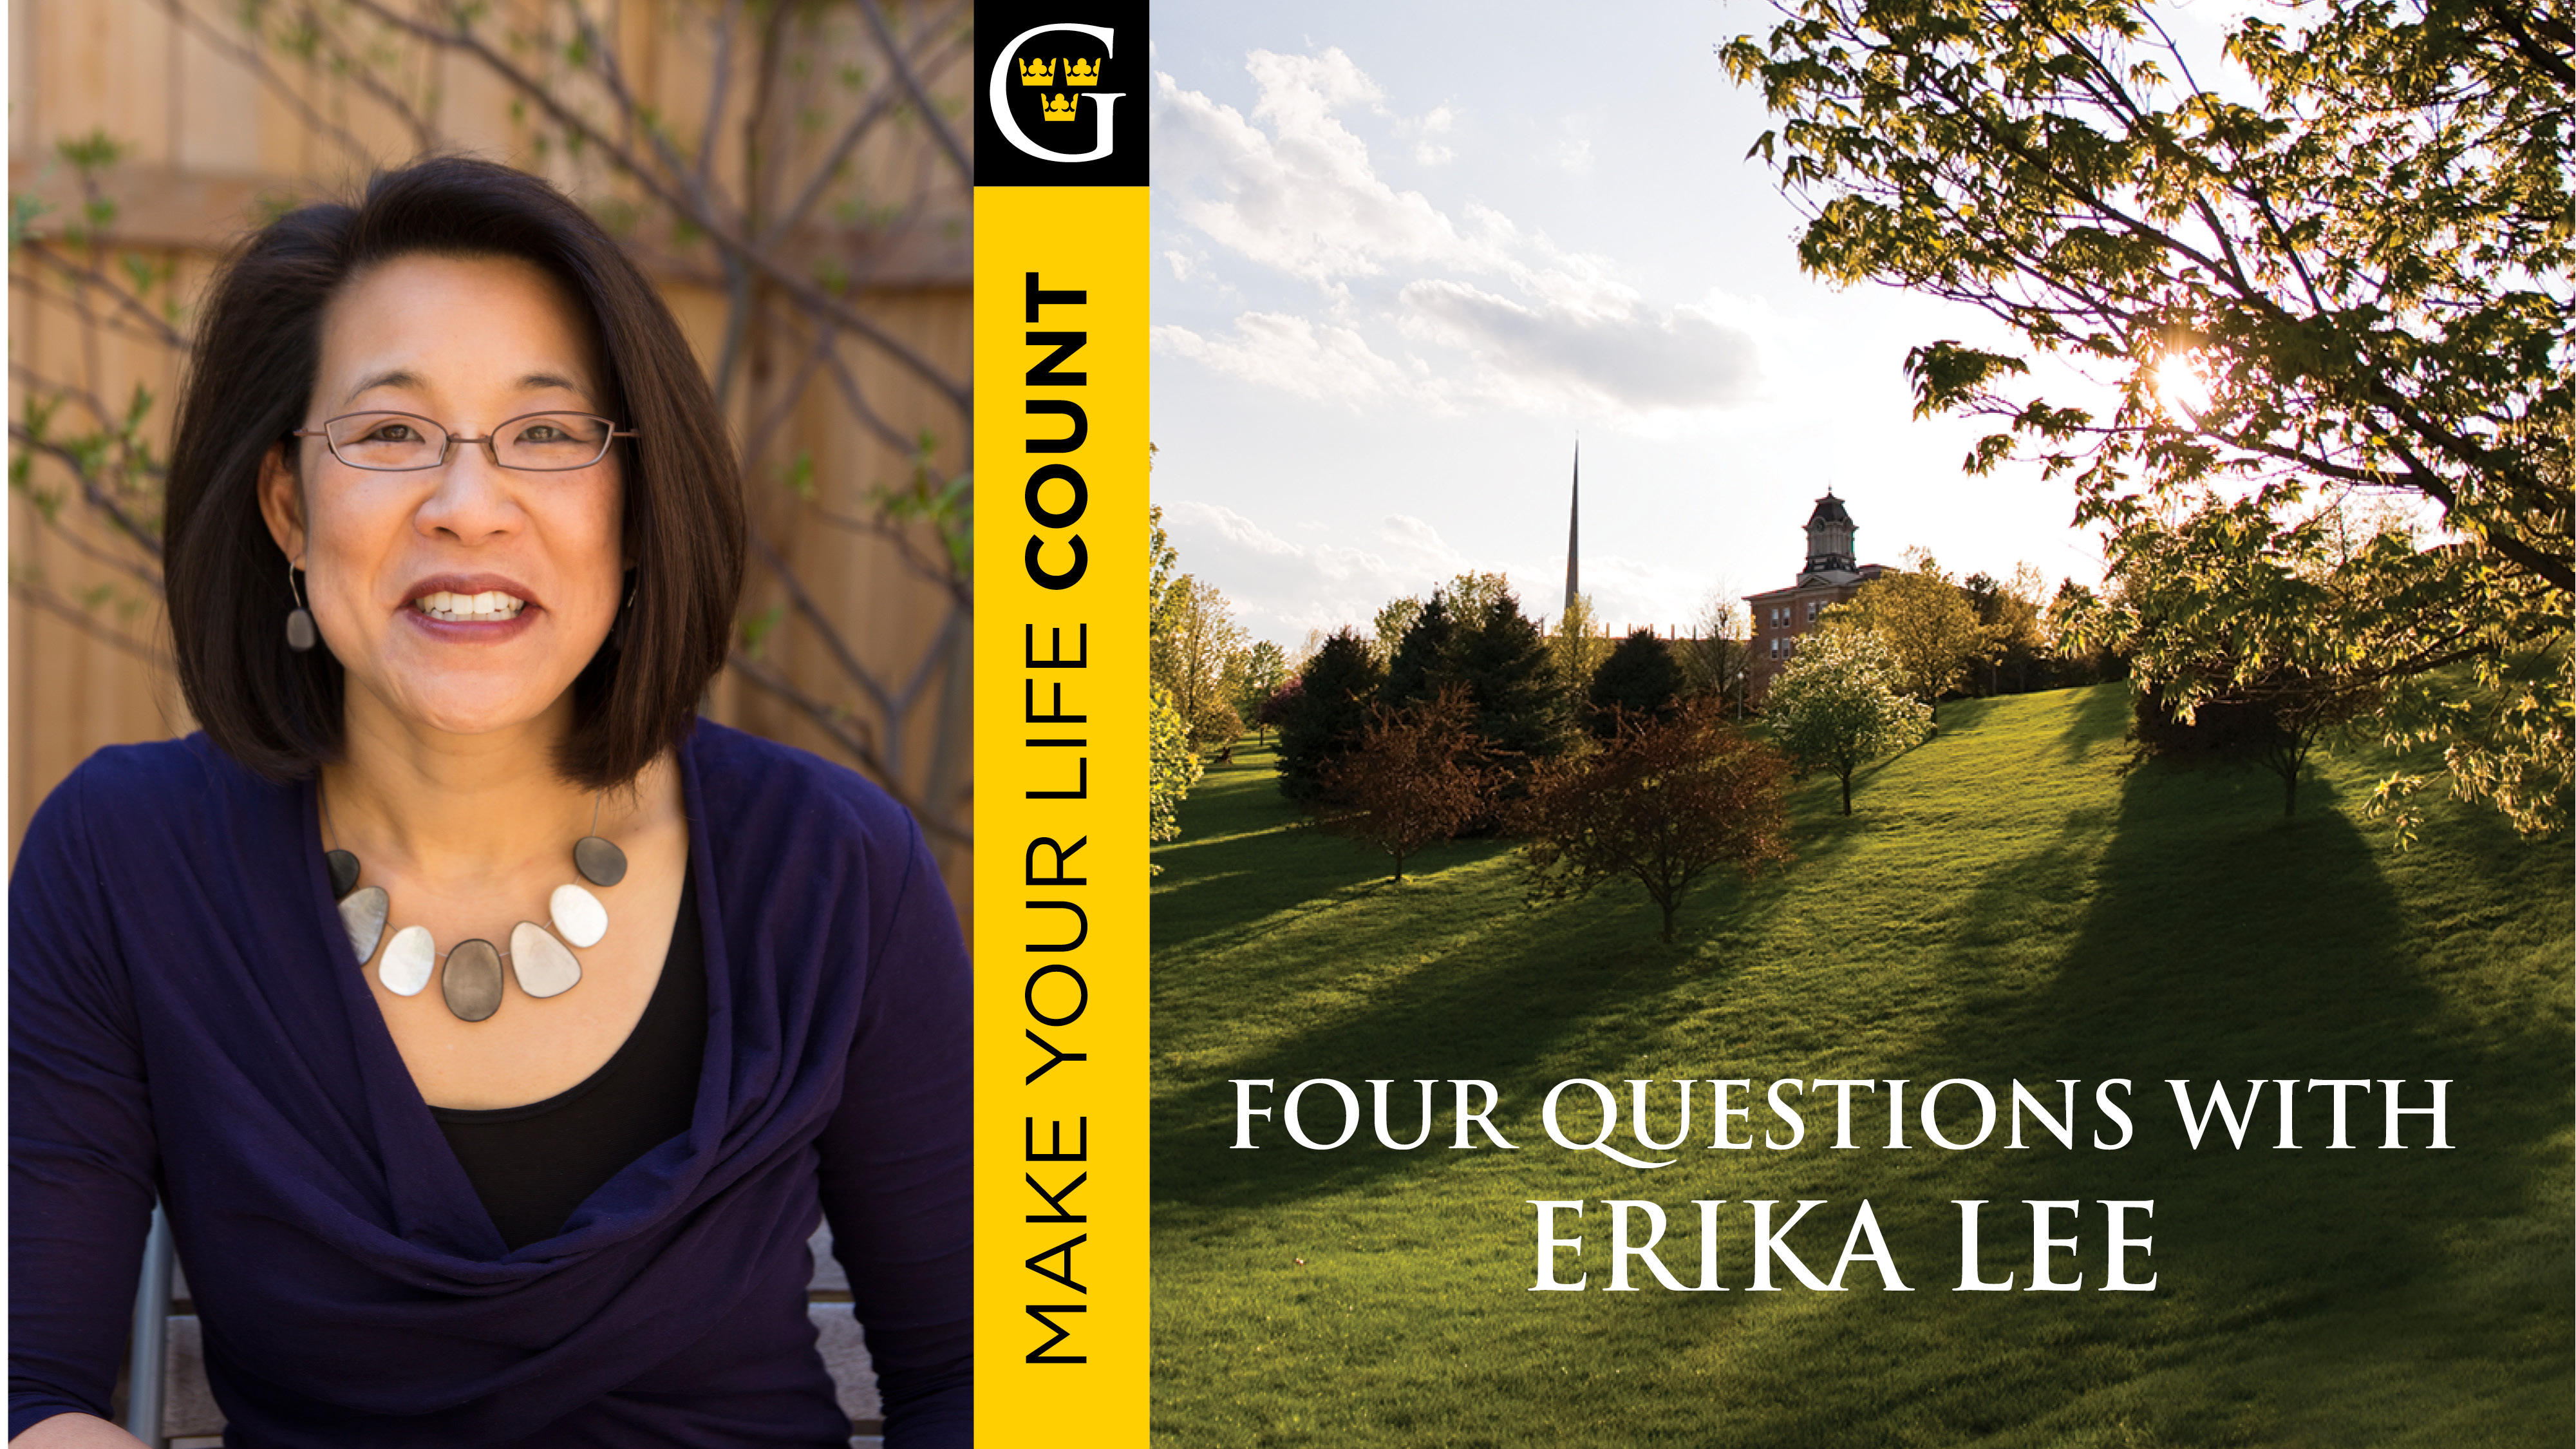 Four Questions with Historian Erika Lee - The University of Minnesota  professor speaks on campus on Oct. 13 about immigration  on  October 10th, 2016 by Stephanie Ash